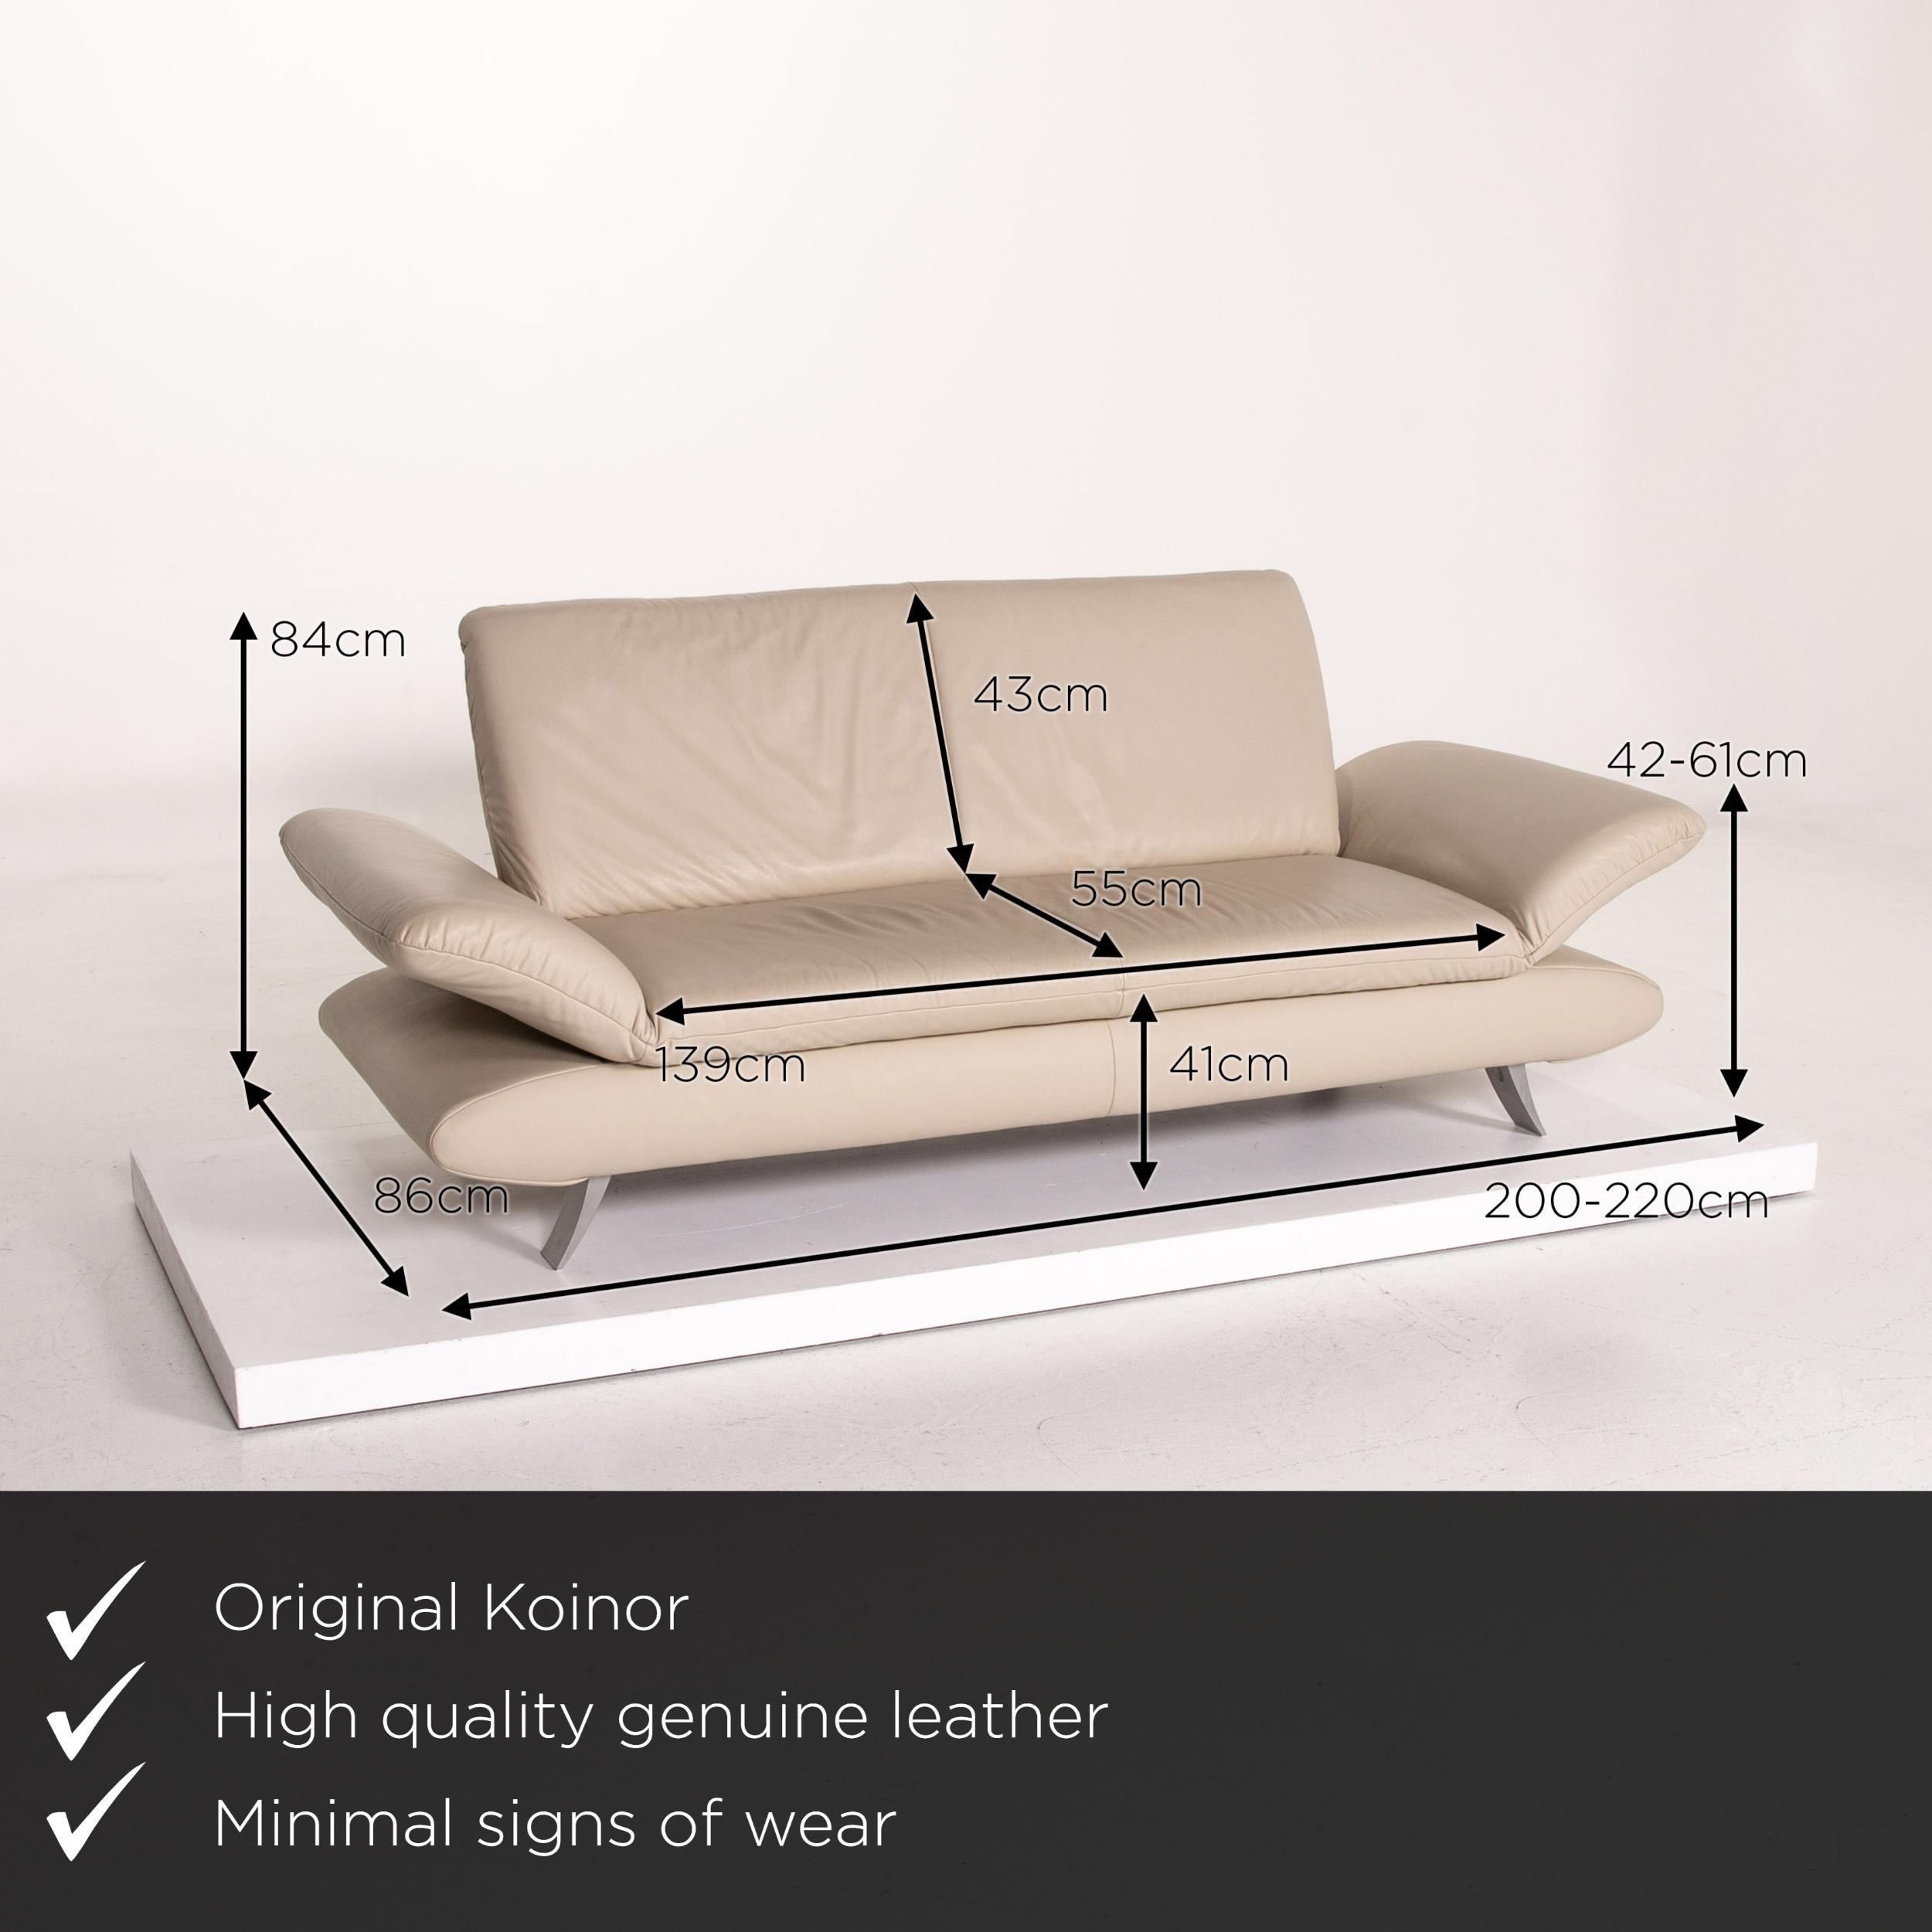 We present to you a Koinor Rossini leather sofa set beige taupe 1x three-seat 1x two-seat.

Product measurements in centimeters:

Depth 86
Width 220
Height 84
Seat height 41
Rest height 42
Seat depth 55
Seat width 139
Back height 43.
 